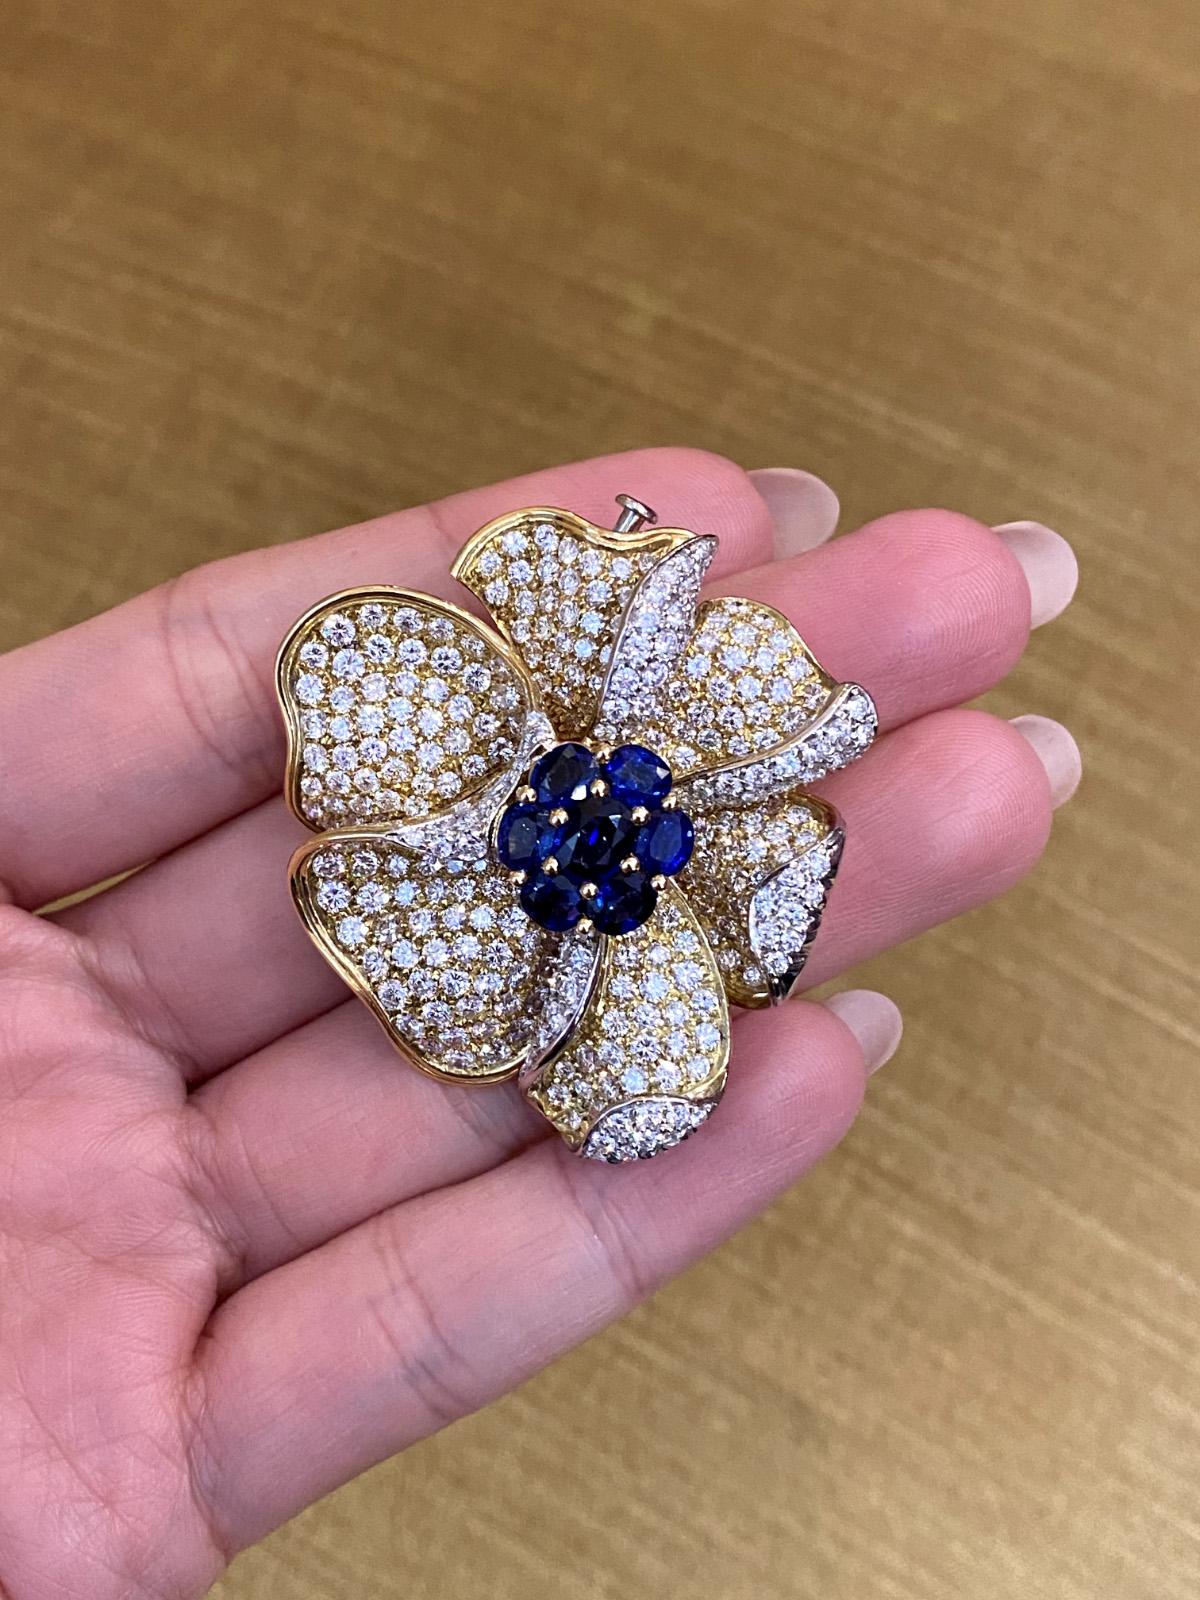 Picchiotti Sapphire and Diamond Flower Brooch in 18k Yellow Gold Large For Sale 2